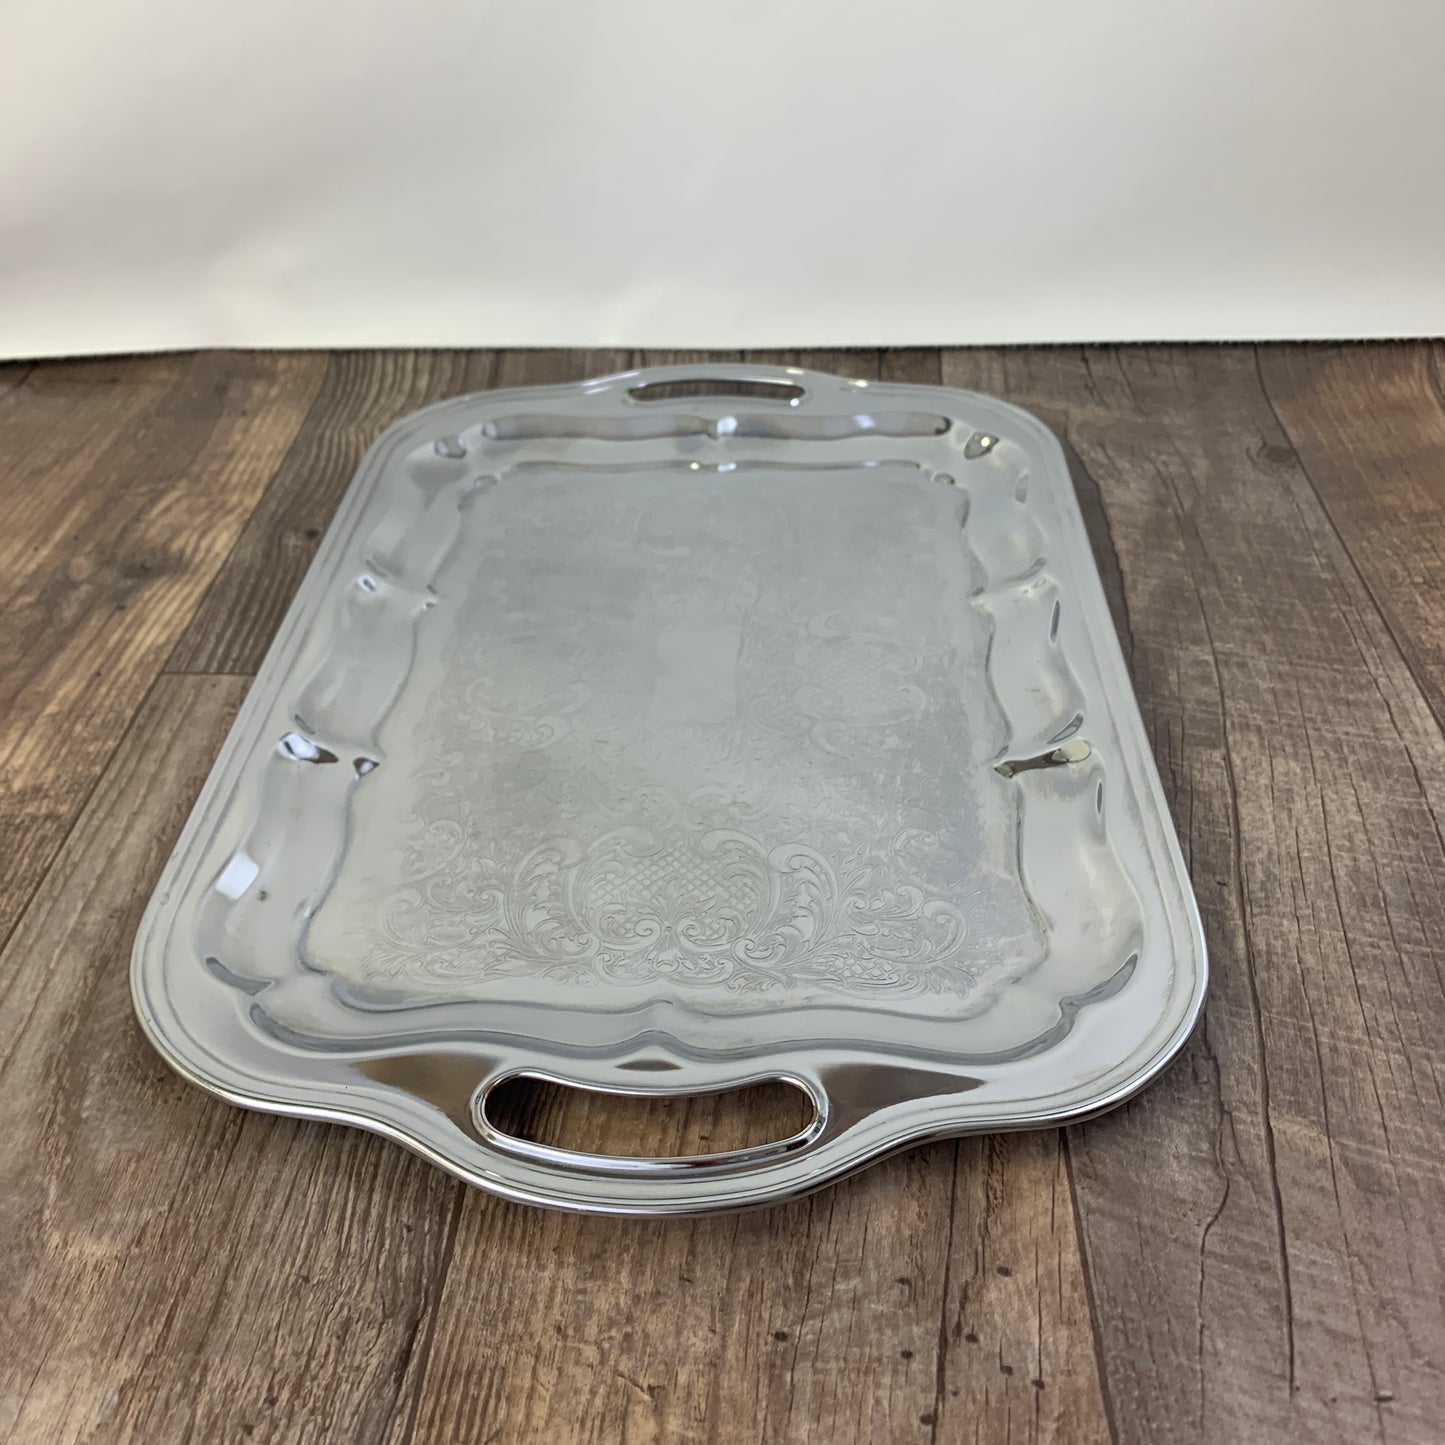 Silver Serving Tray Large Rectangle Shaped Tray with Handles, Vanity Organizer